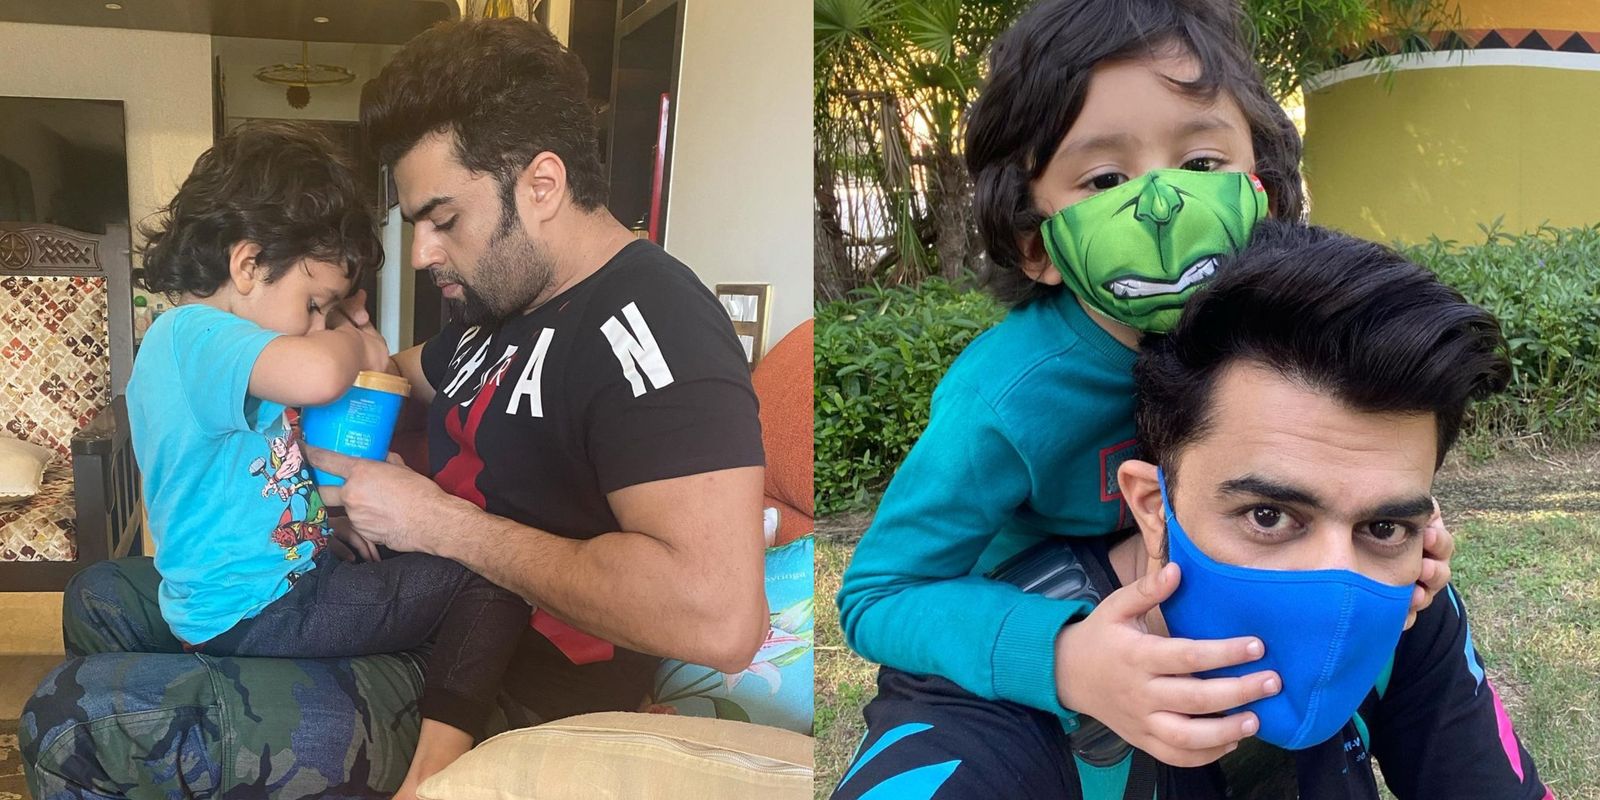 Maniesh Paul shares adorable pictures on his son Yuvann’s birthday along with a funny caption